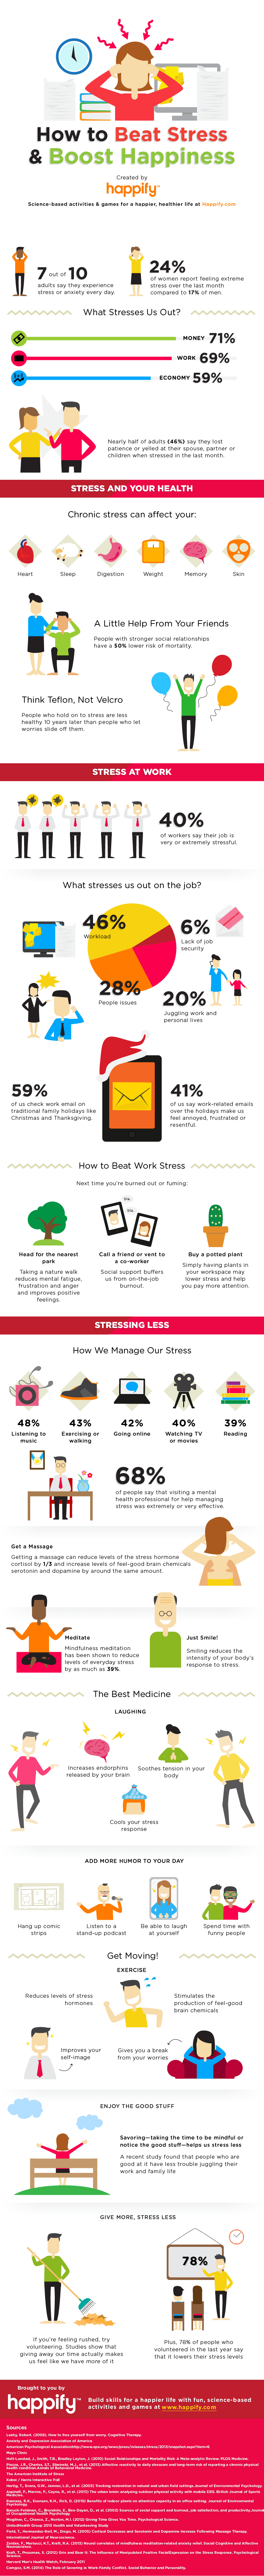 How To Beat Stress & Boost Happiness